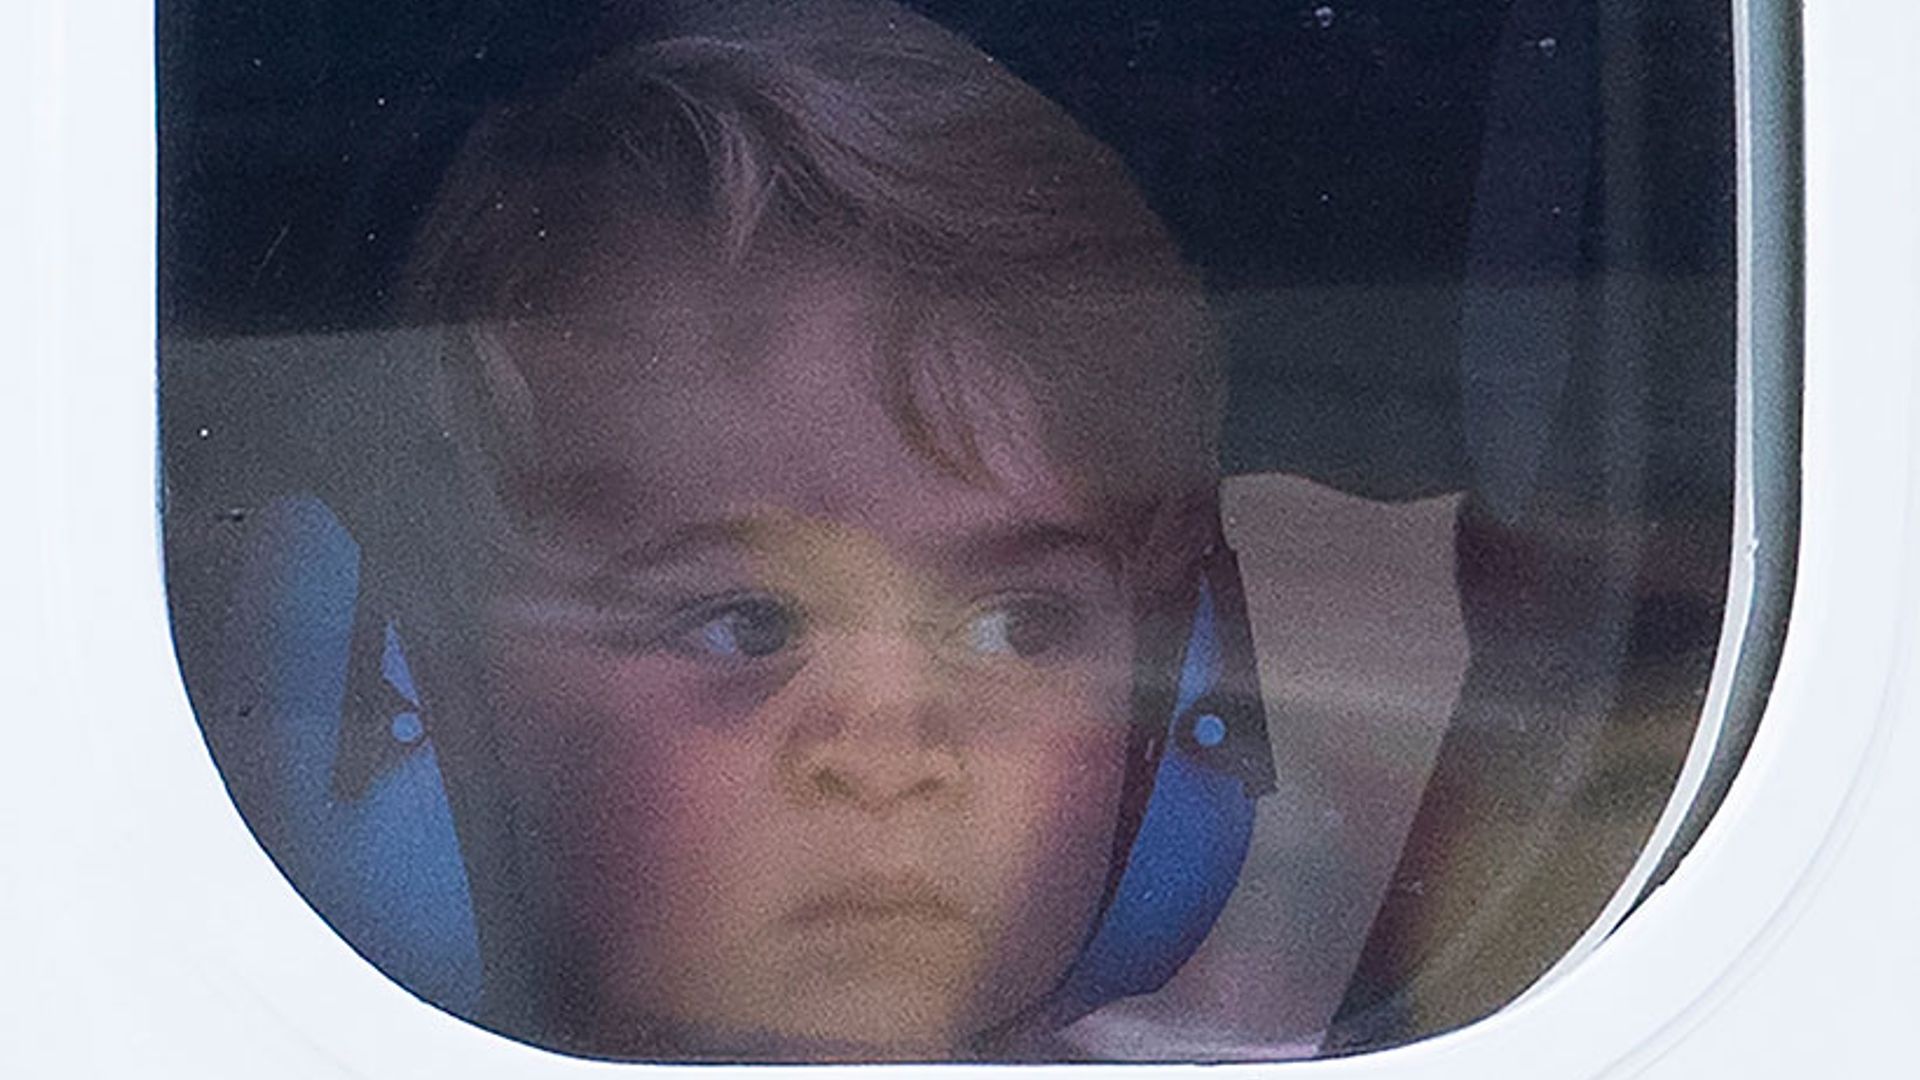 Prince George reveals his love for flying as he bids farewell to Canada: 'I'm going to fly us to England'